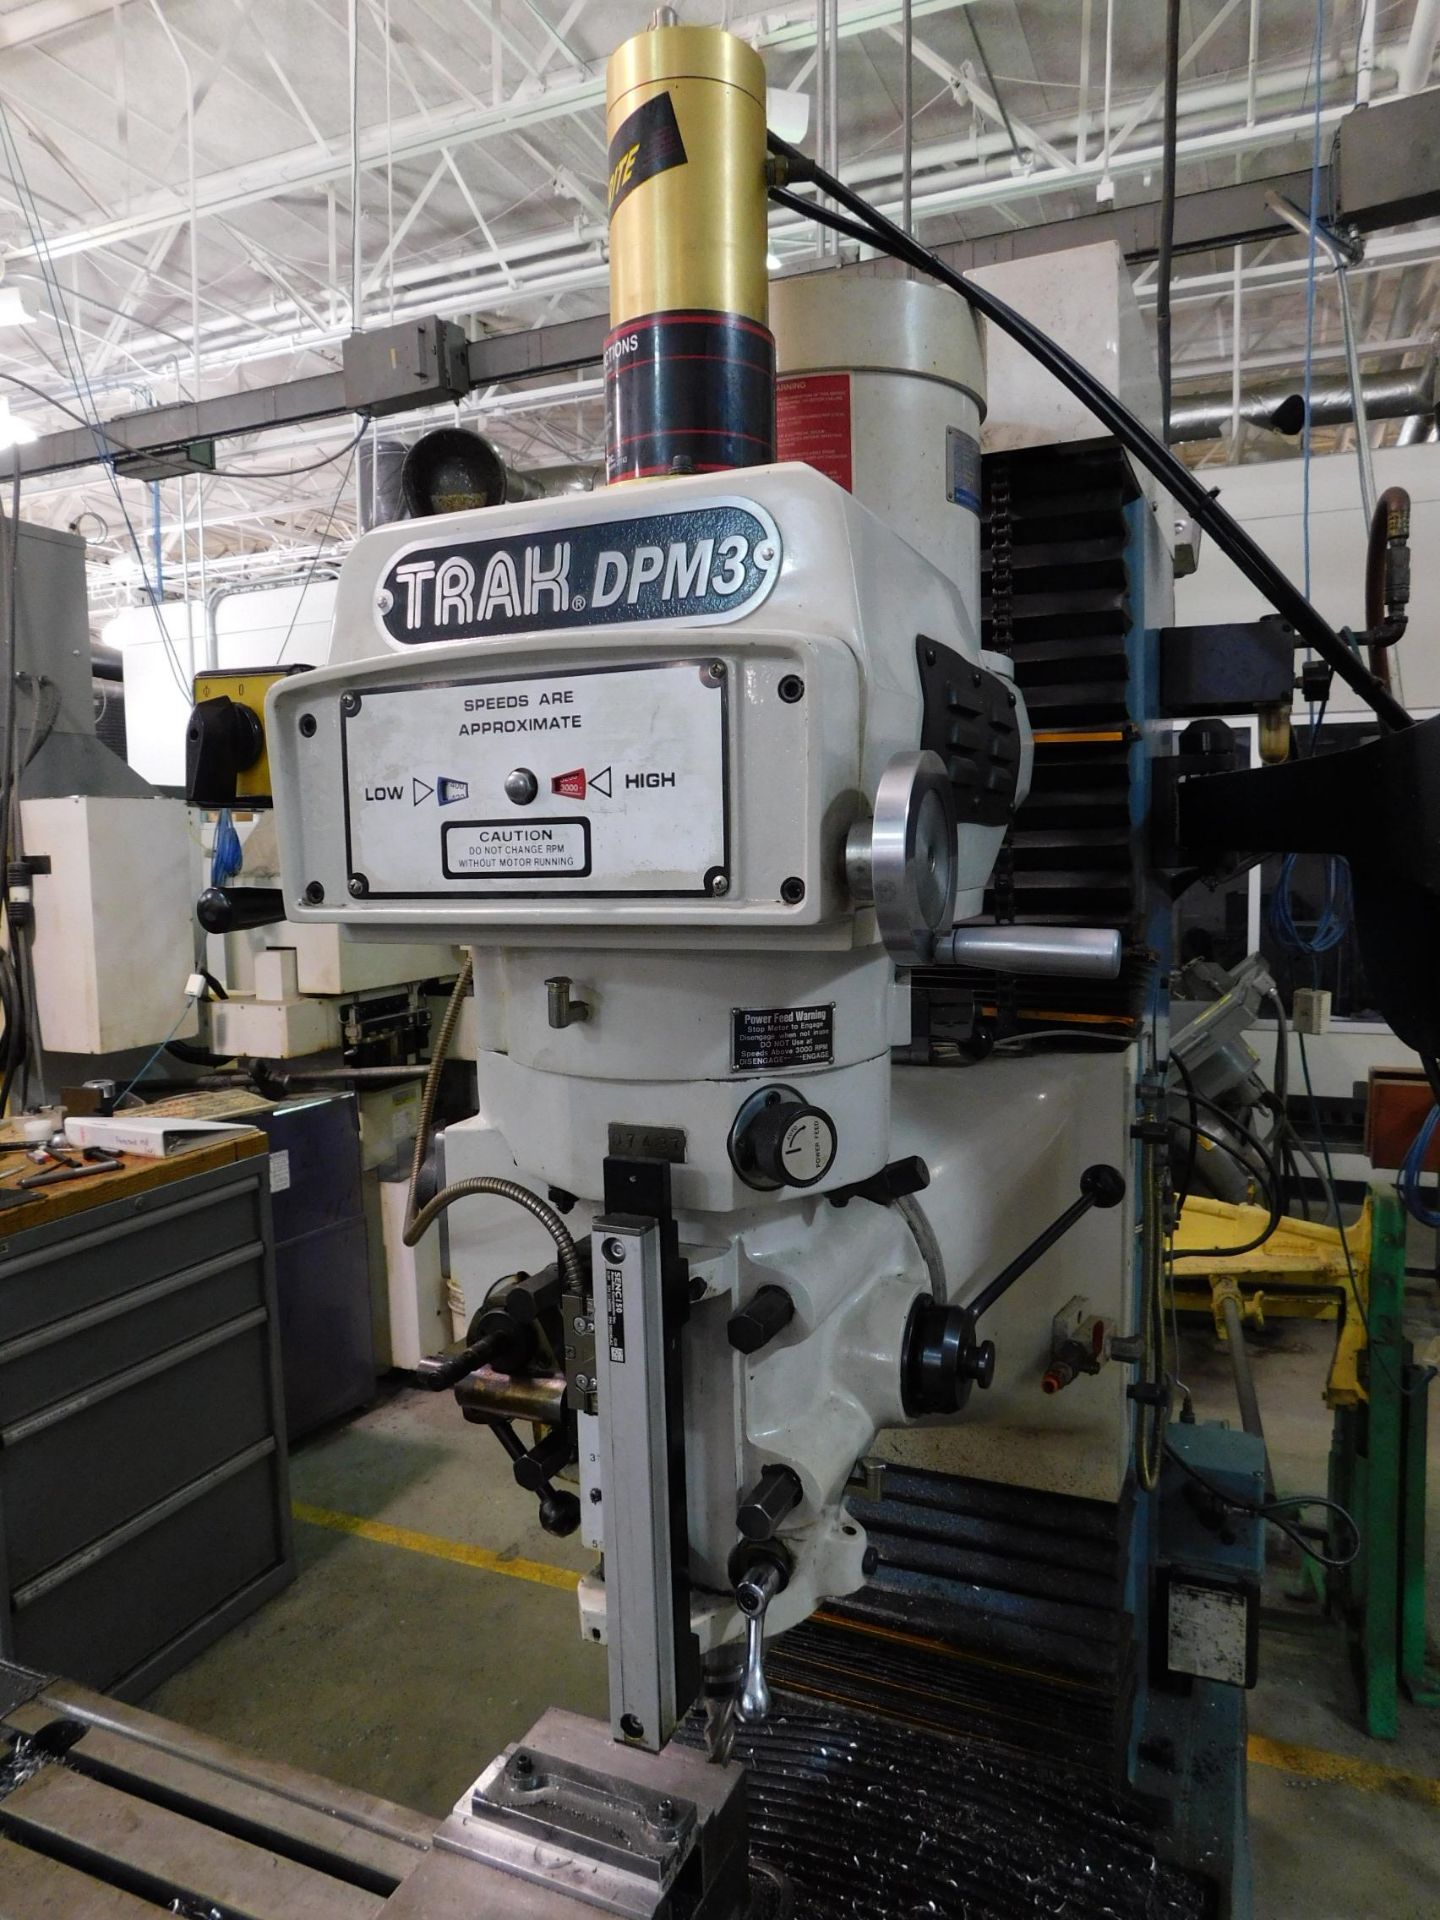 TRAK DPMSX3 CNC Bed Mill, SN 081CF16279, with Proto Trak SMX CNC Control, 10" x 50" Table, Power - Image 3 of 12